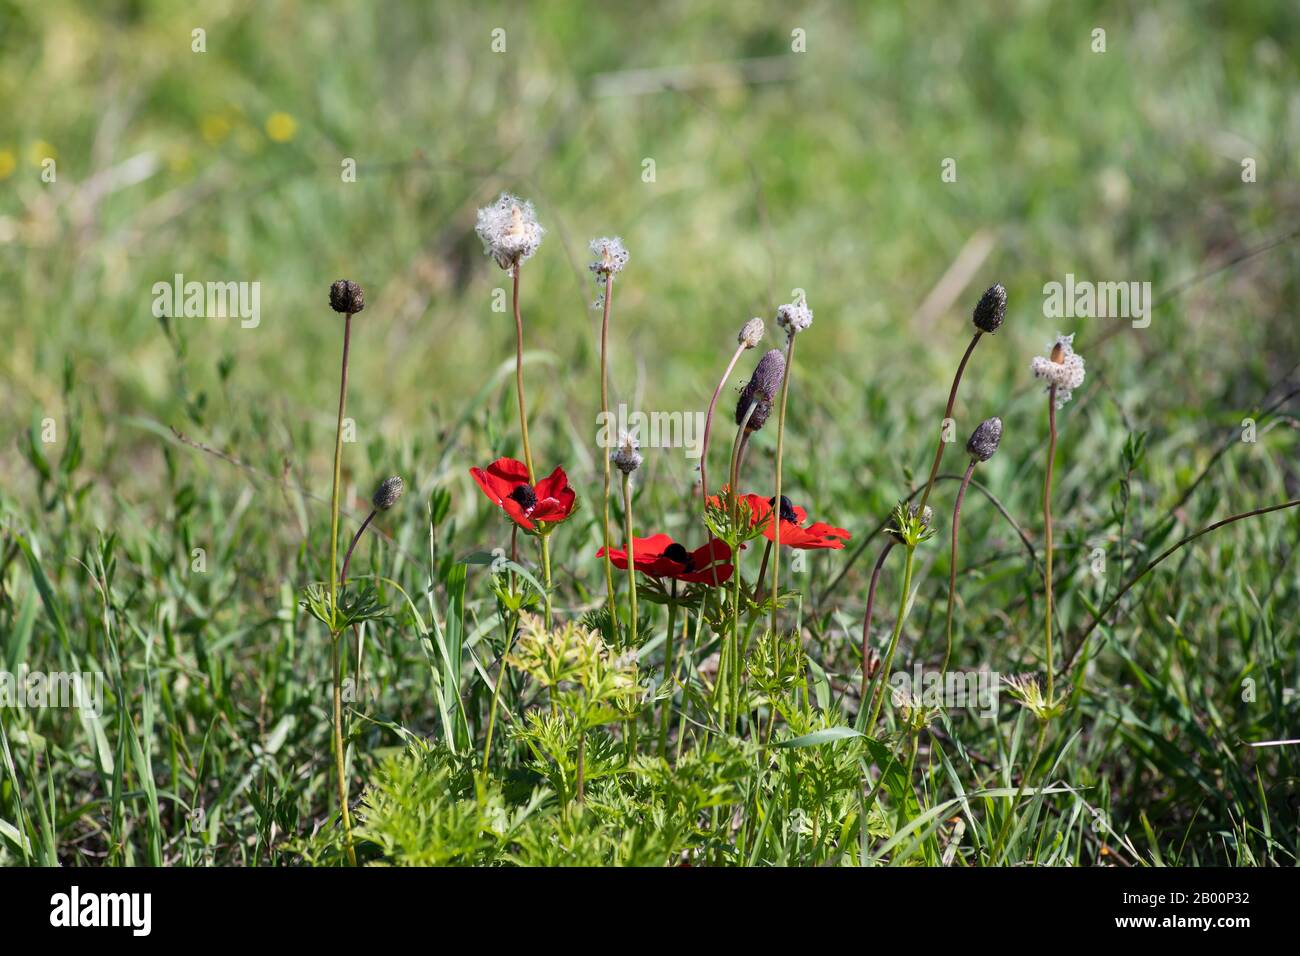 Red anemone flowers and buds in bloom in the grass in the sun closeup Stock Photo